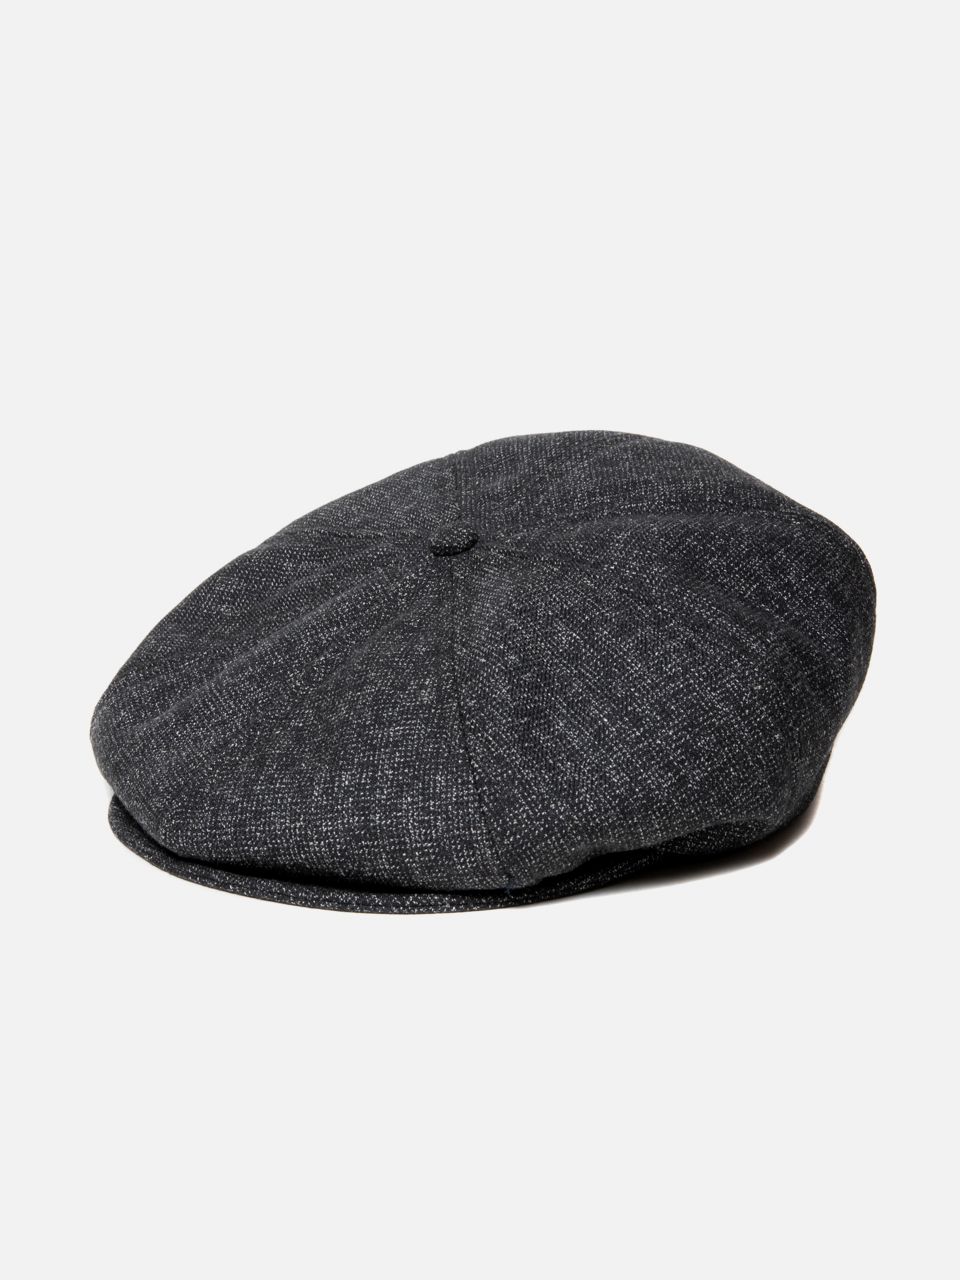 CDL WOOL CASQUETTE ウール キャスケット 登坂広臣 三代